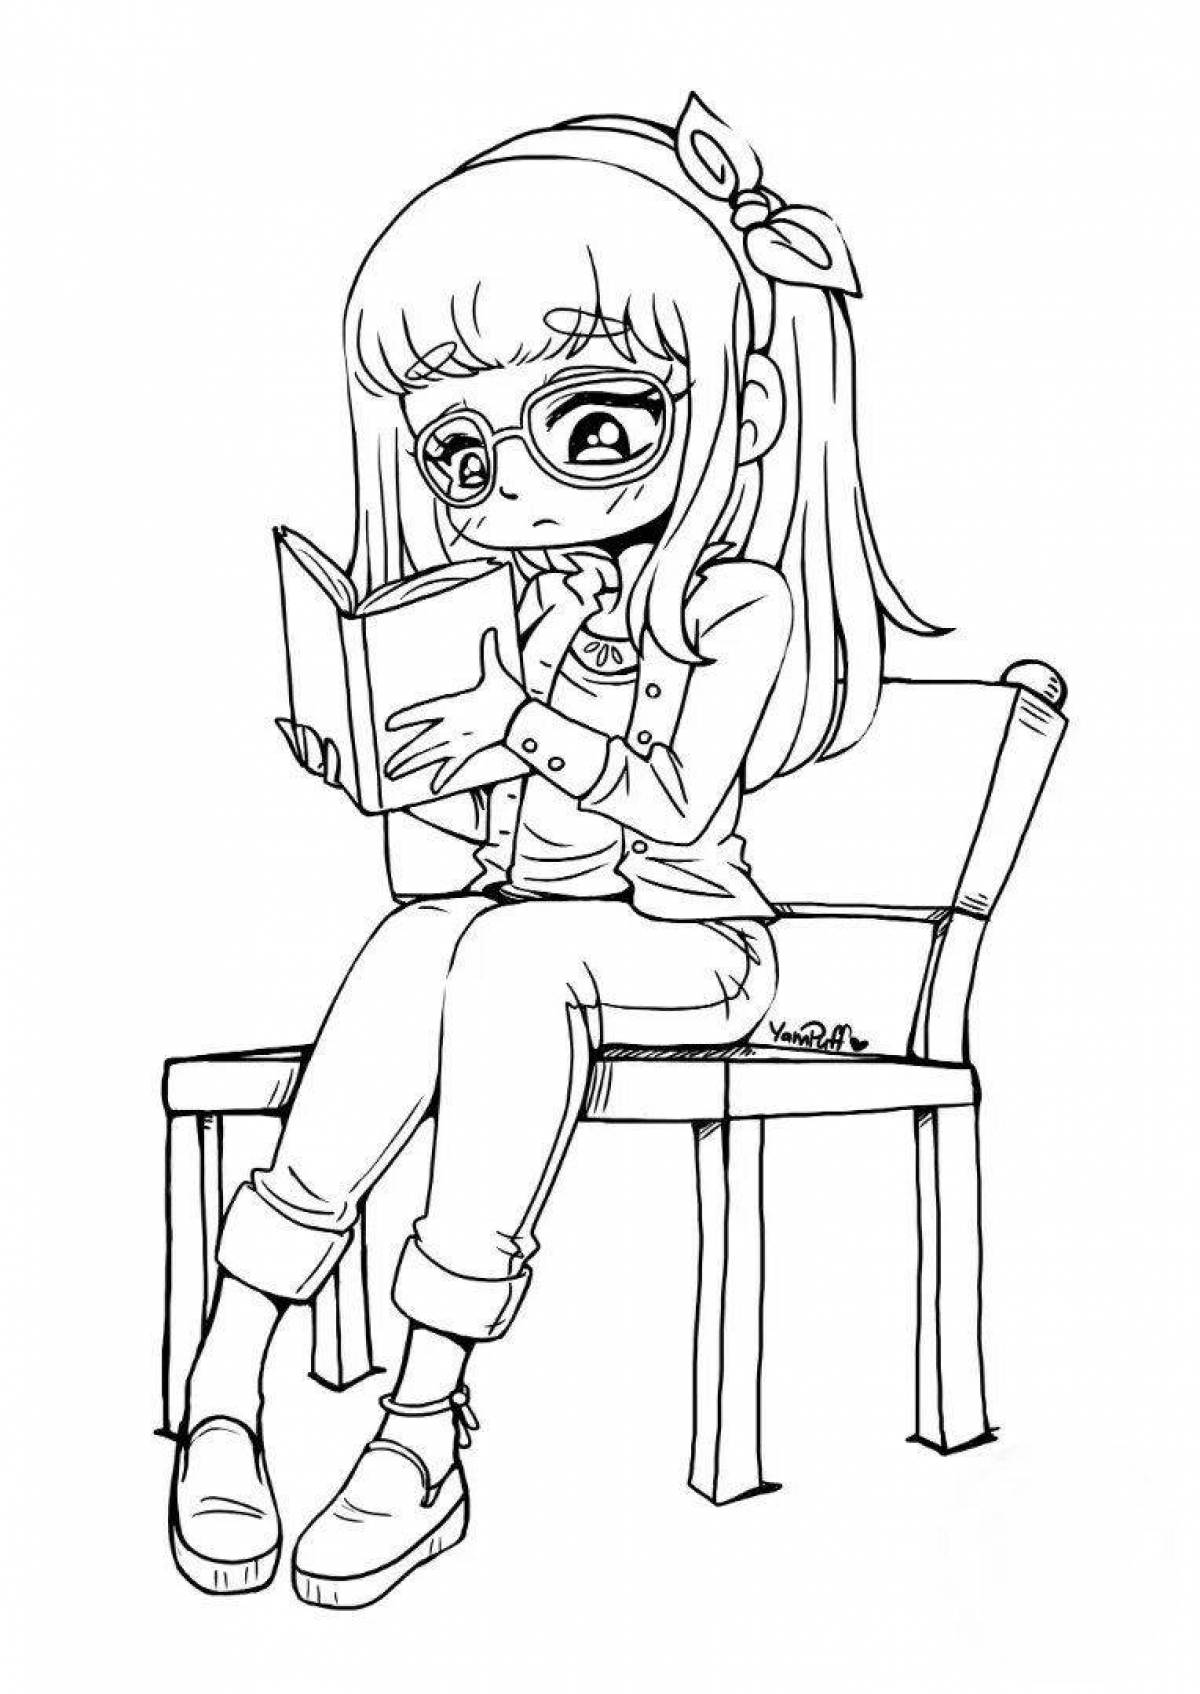 Inspired girl reading a coloring book